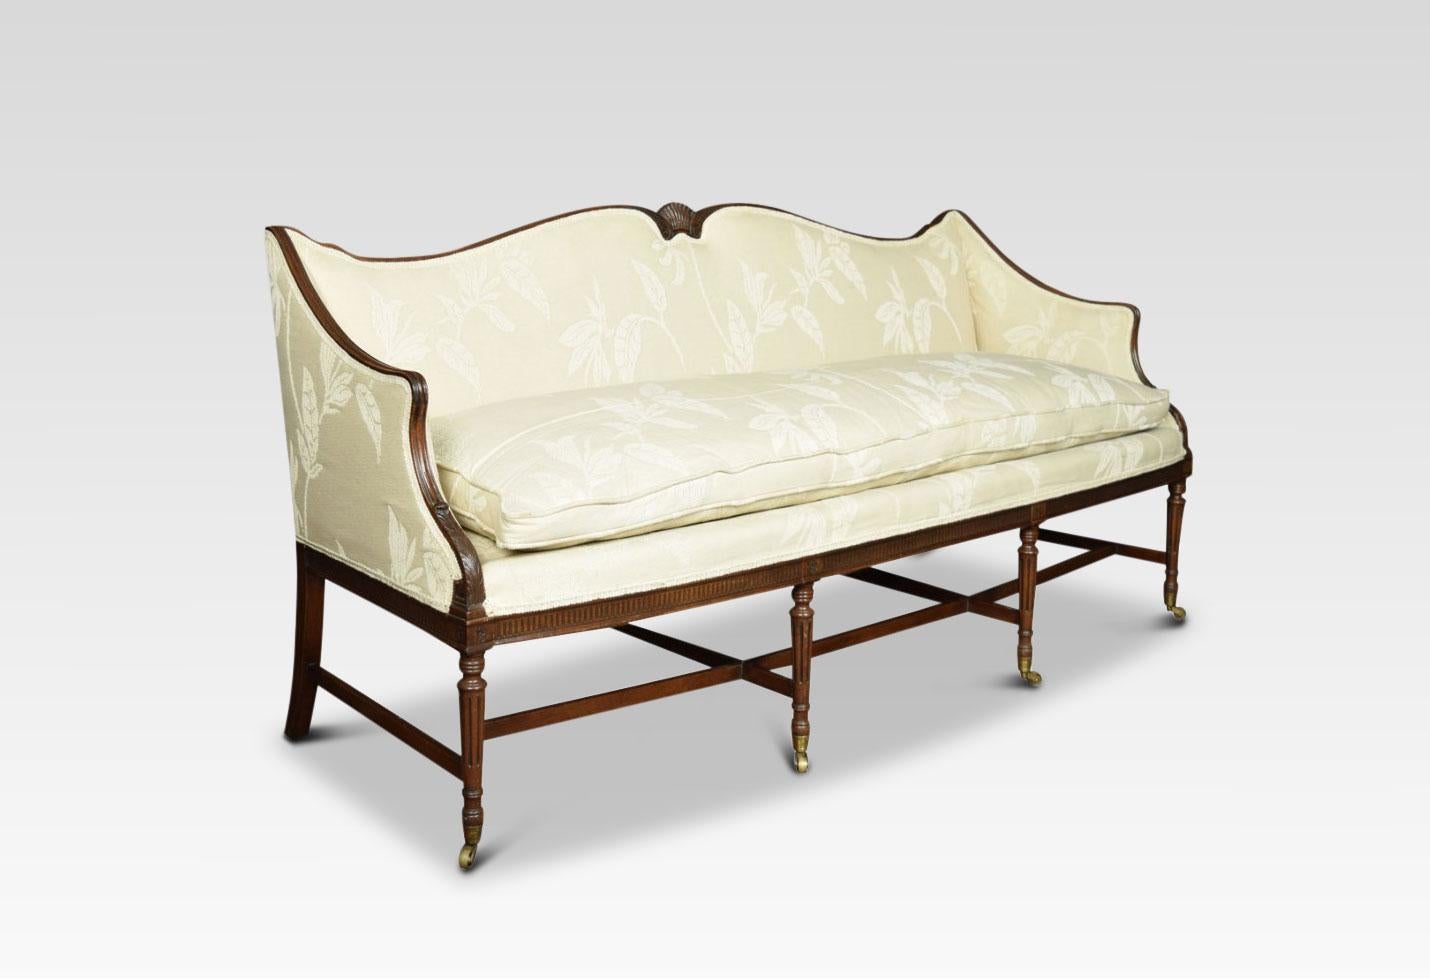 Early 20th century mahogany Regency style three-seat settee, the shaped back with central carved fan, above back seat and arms upholstered in serviceable cream chenille fabric with removable cushion All raised up on fluted front legs terminating in